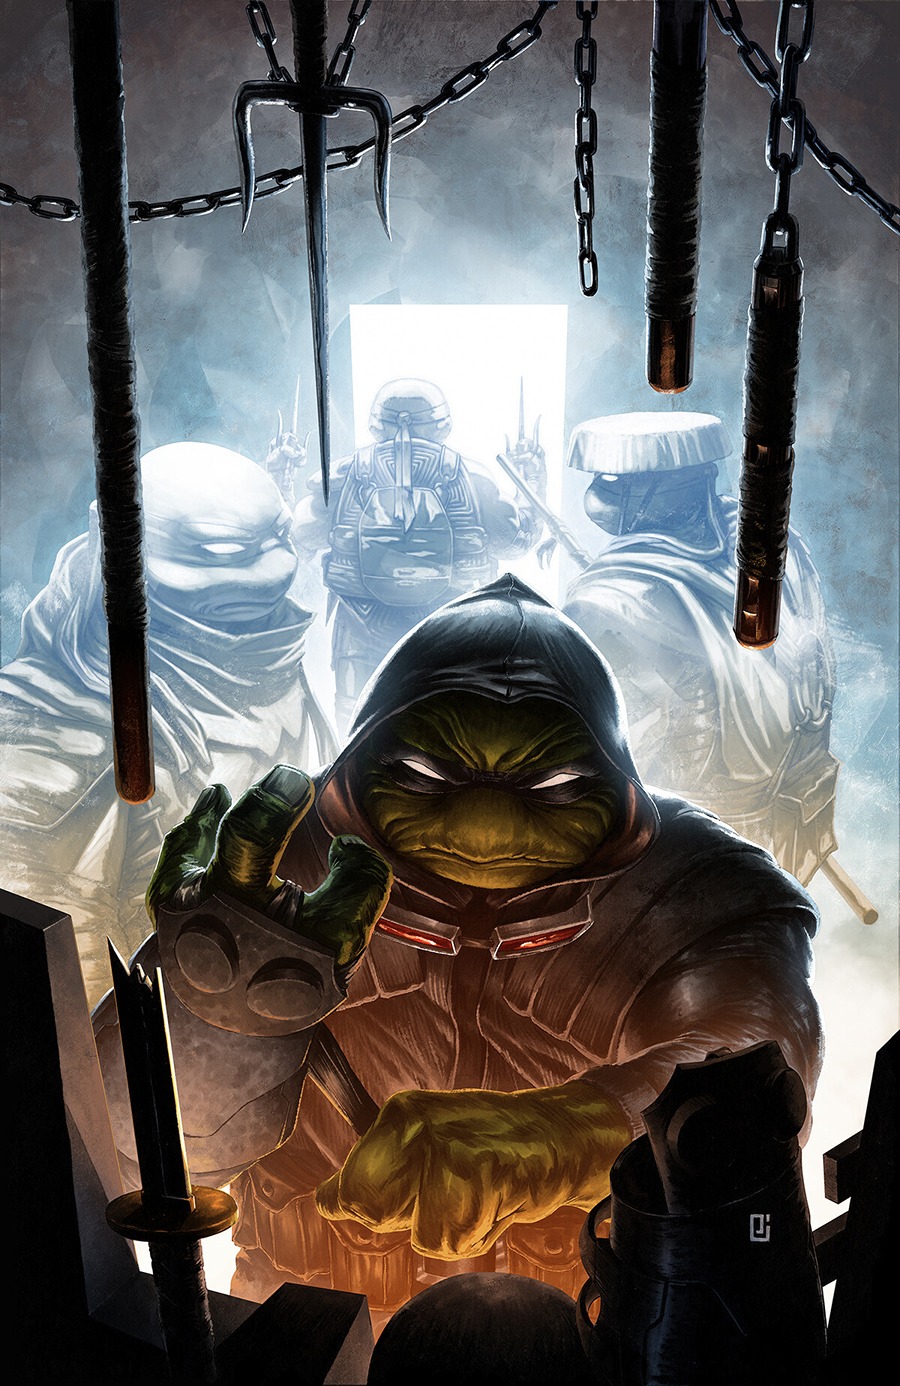 TMNT The Last Ronin Video Game What We Want to See